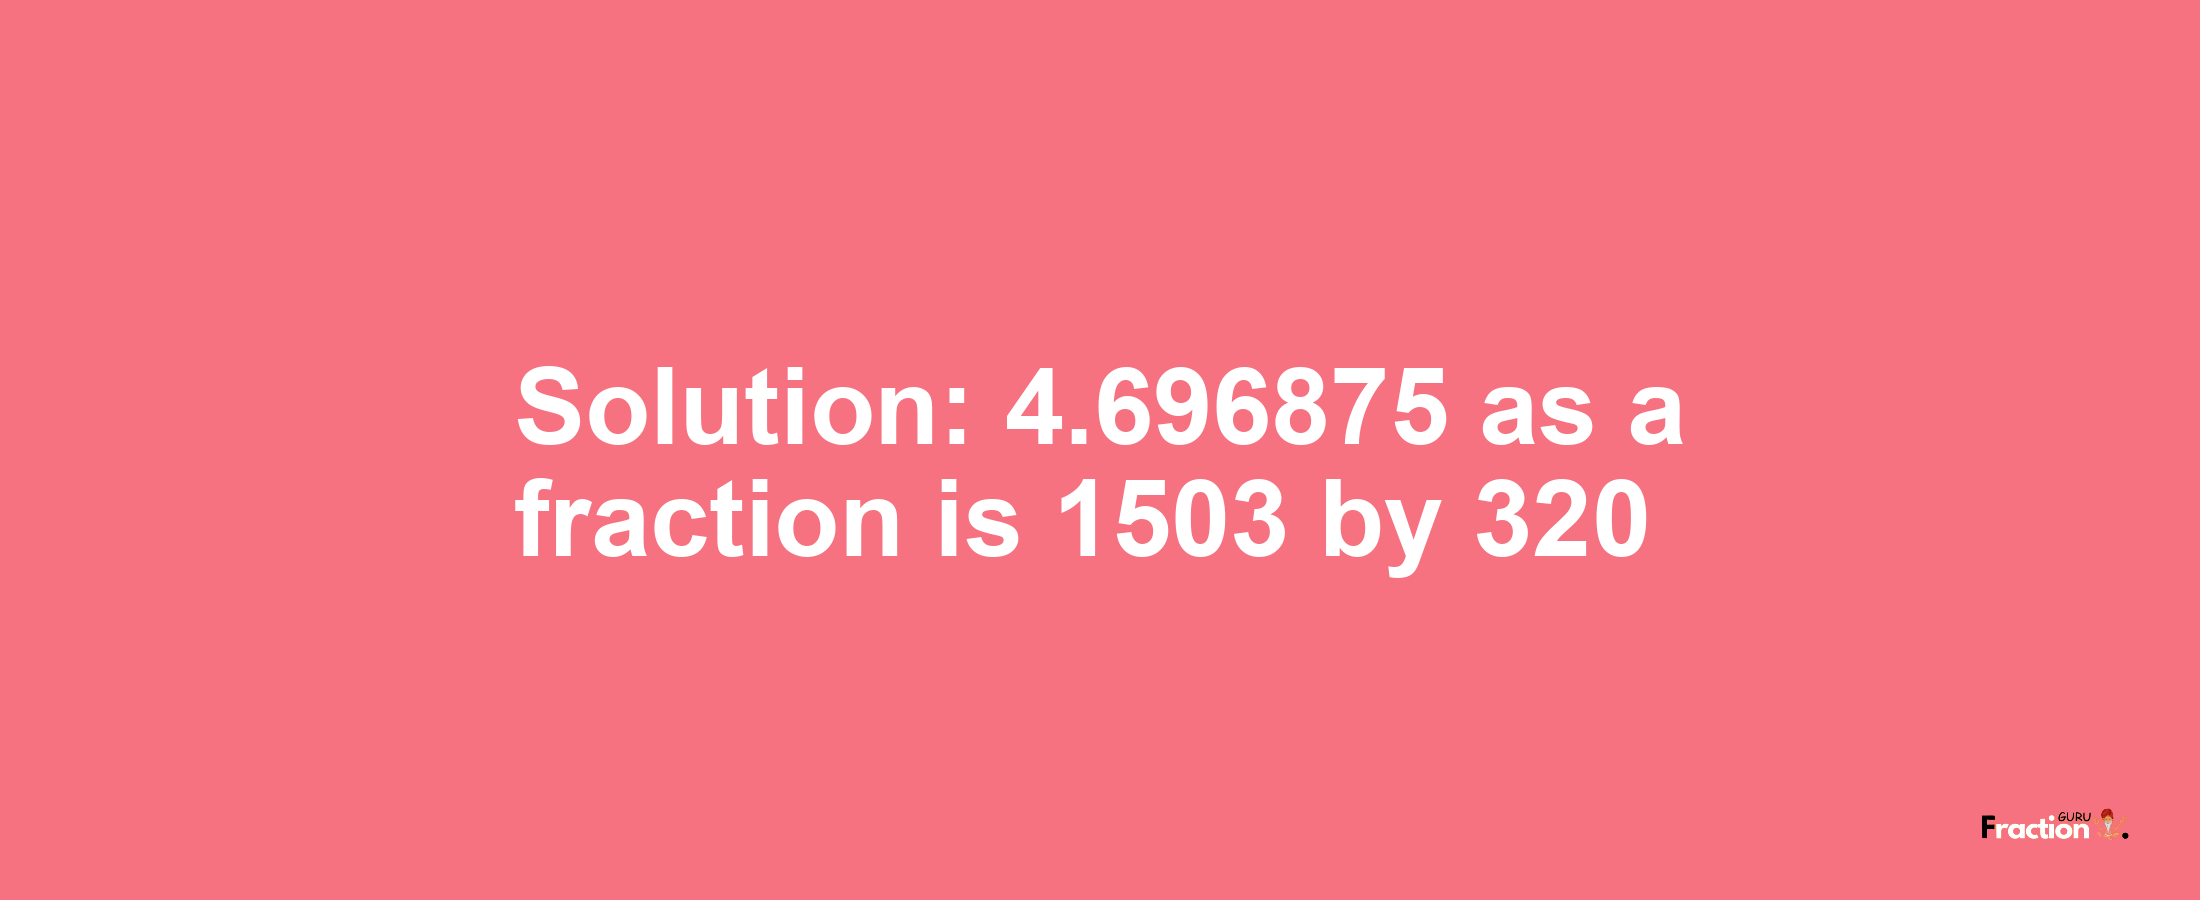 Solution:4.696875 as a fraction is 1503/320